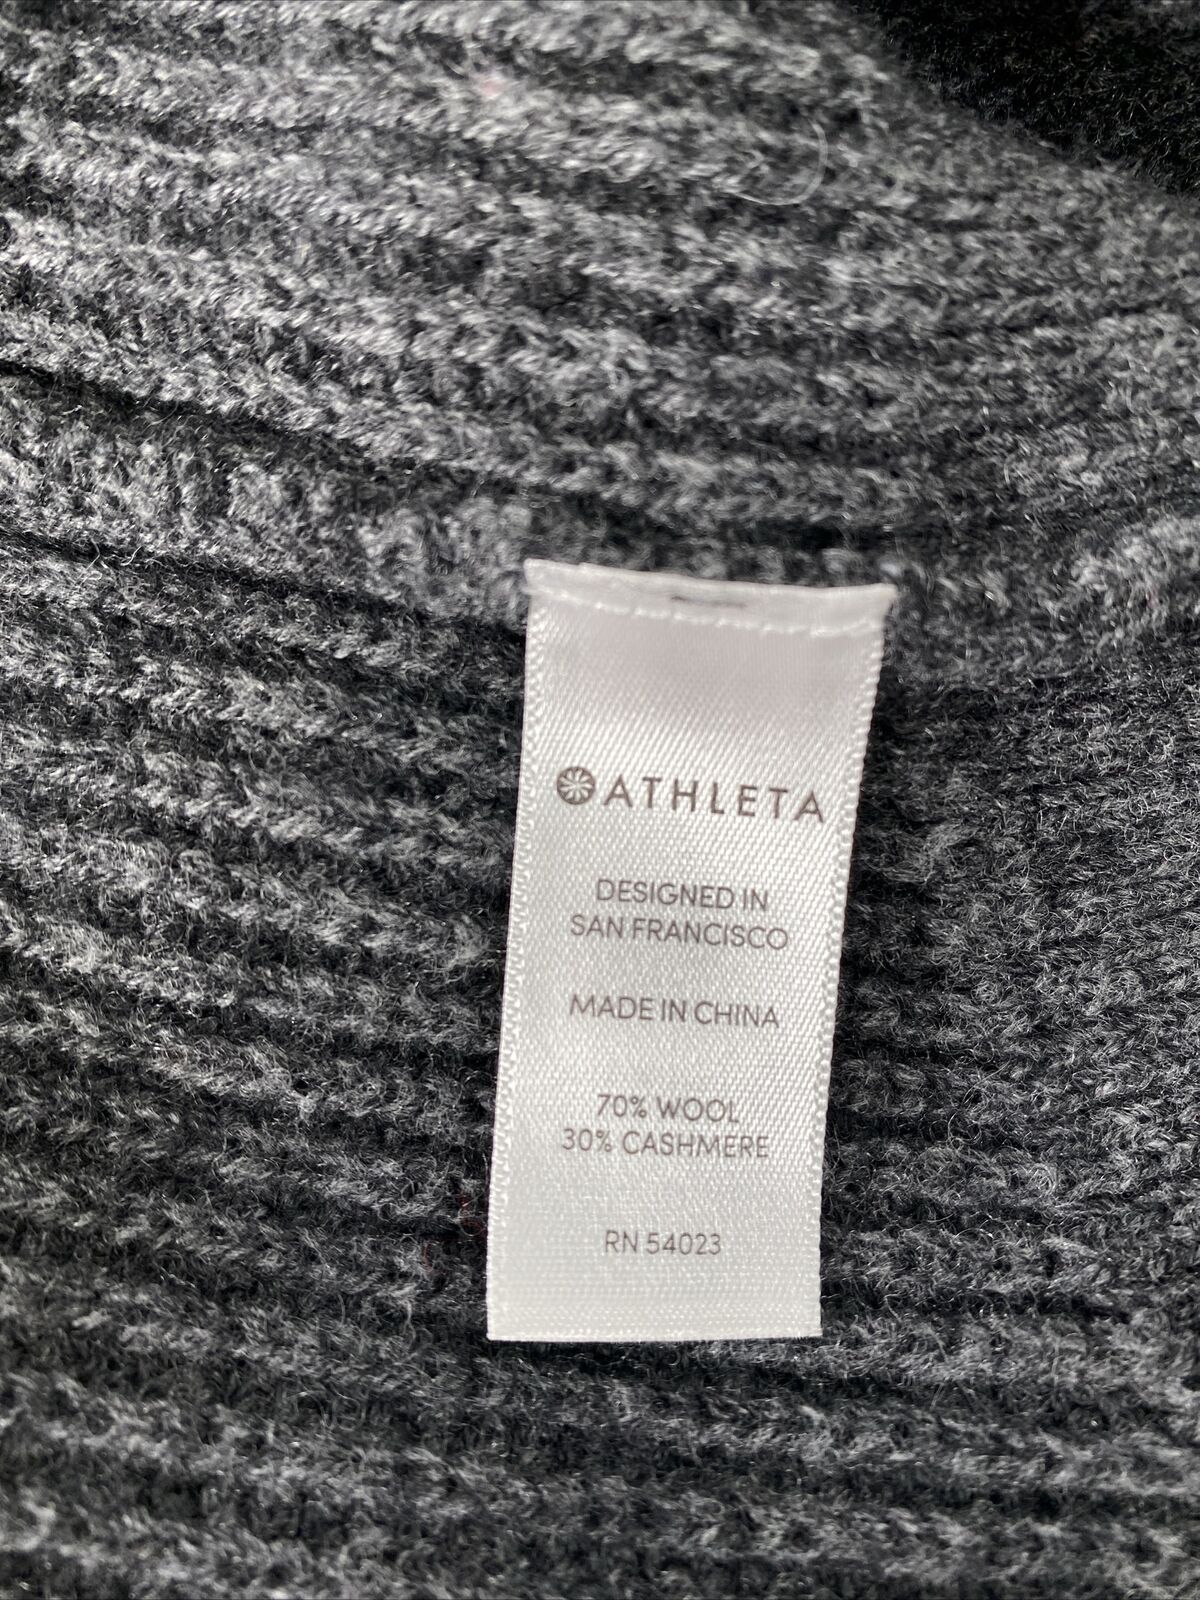 Athleta Women's Gray Wool/Cashmere Blend Lucca Wrap Sweater - S